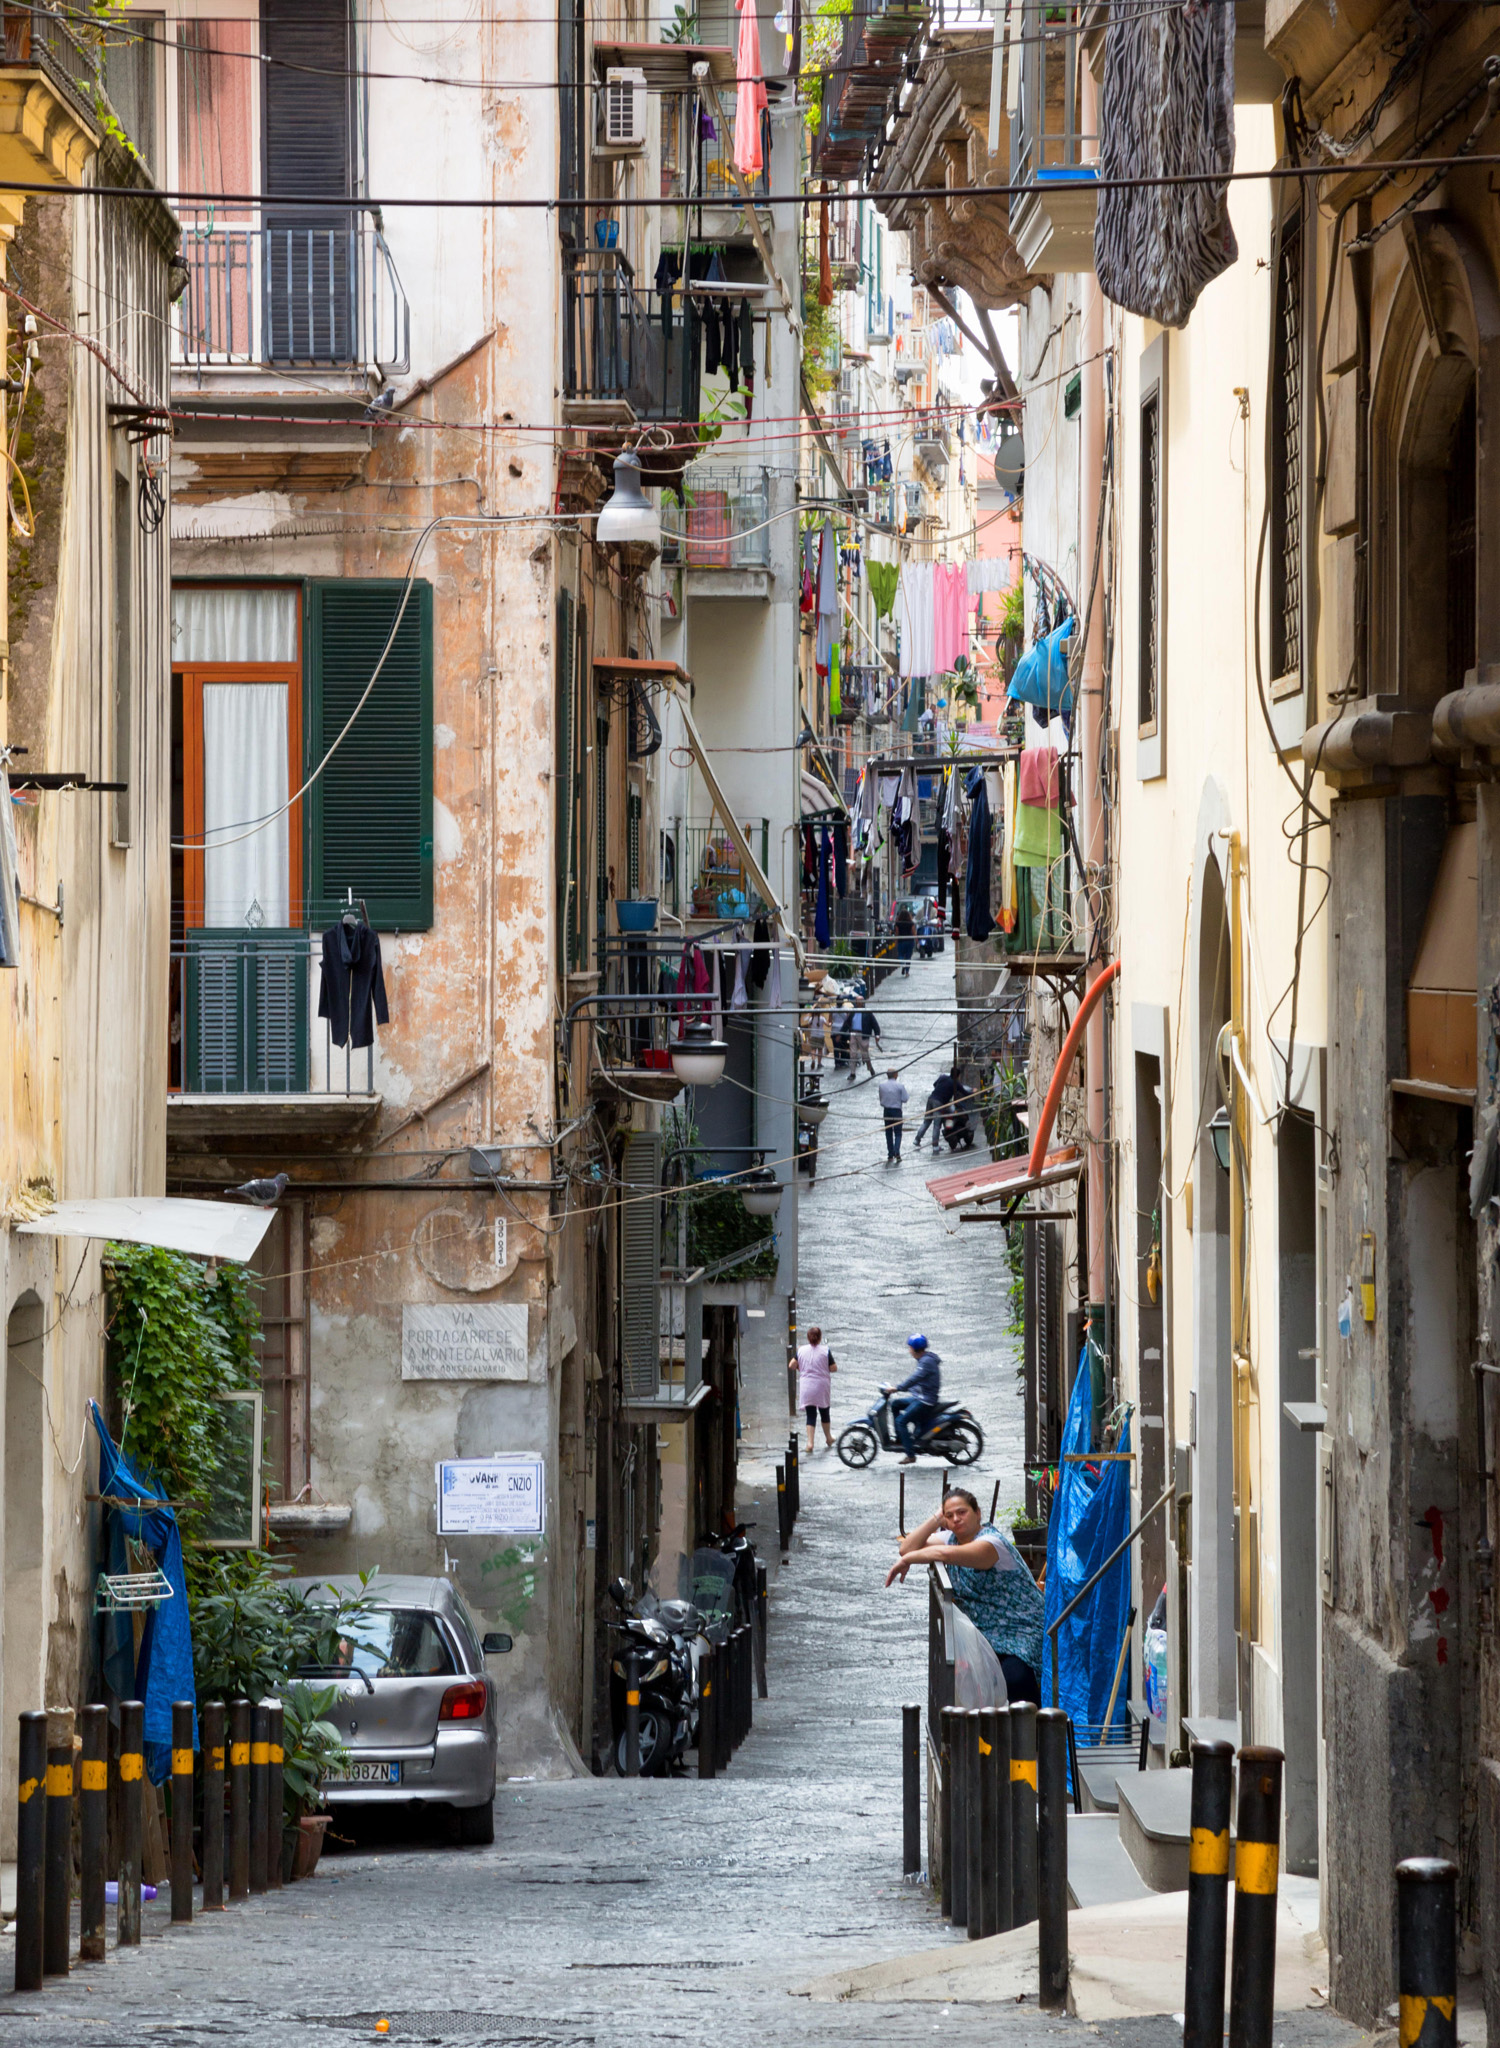 Spaccanapoli cuts a pathway through the heart of Naples Day 2 Morning - photo 4